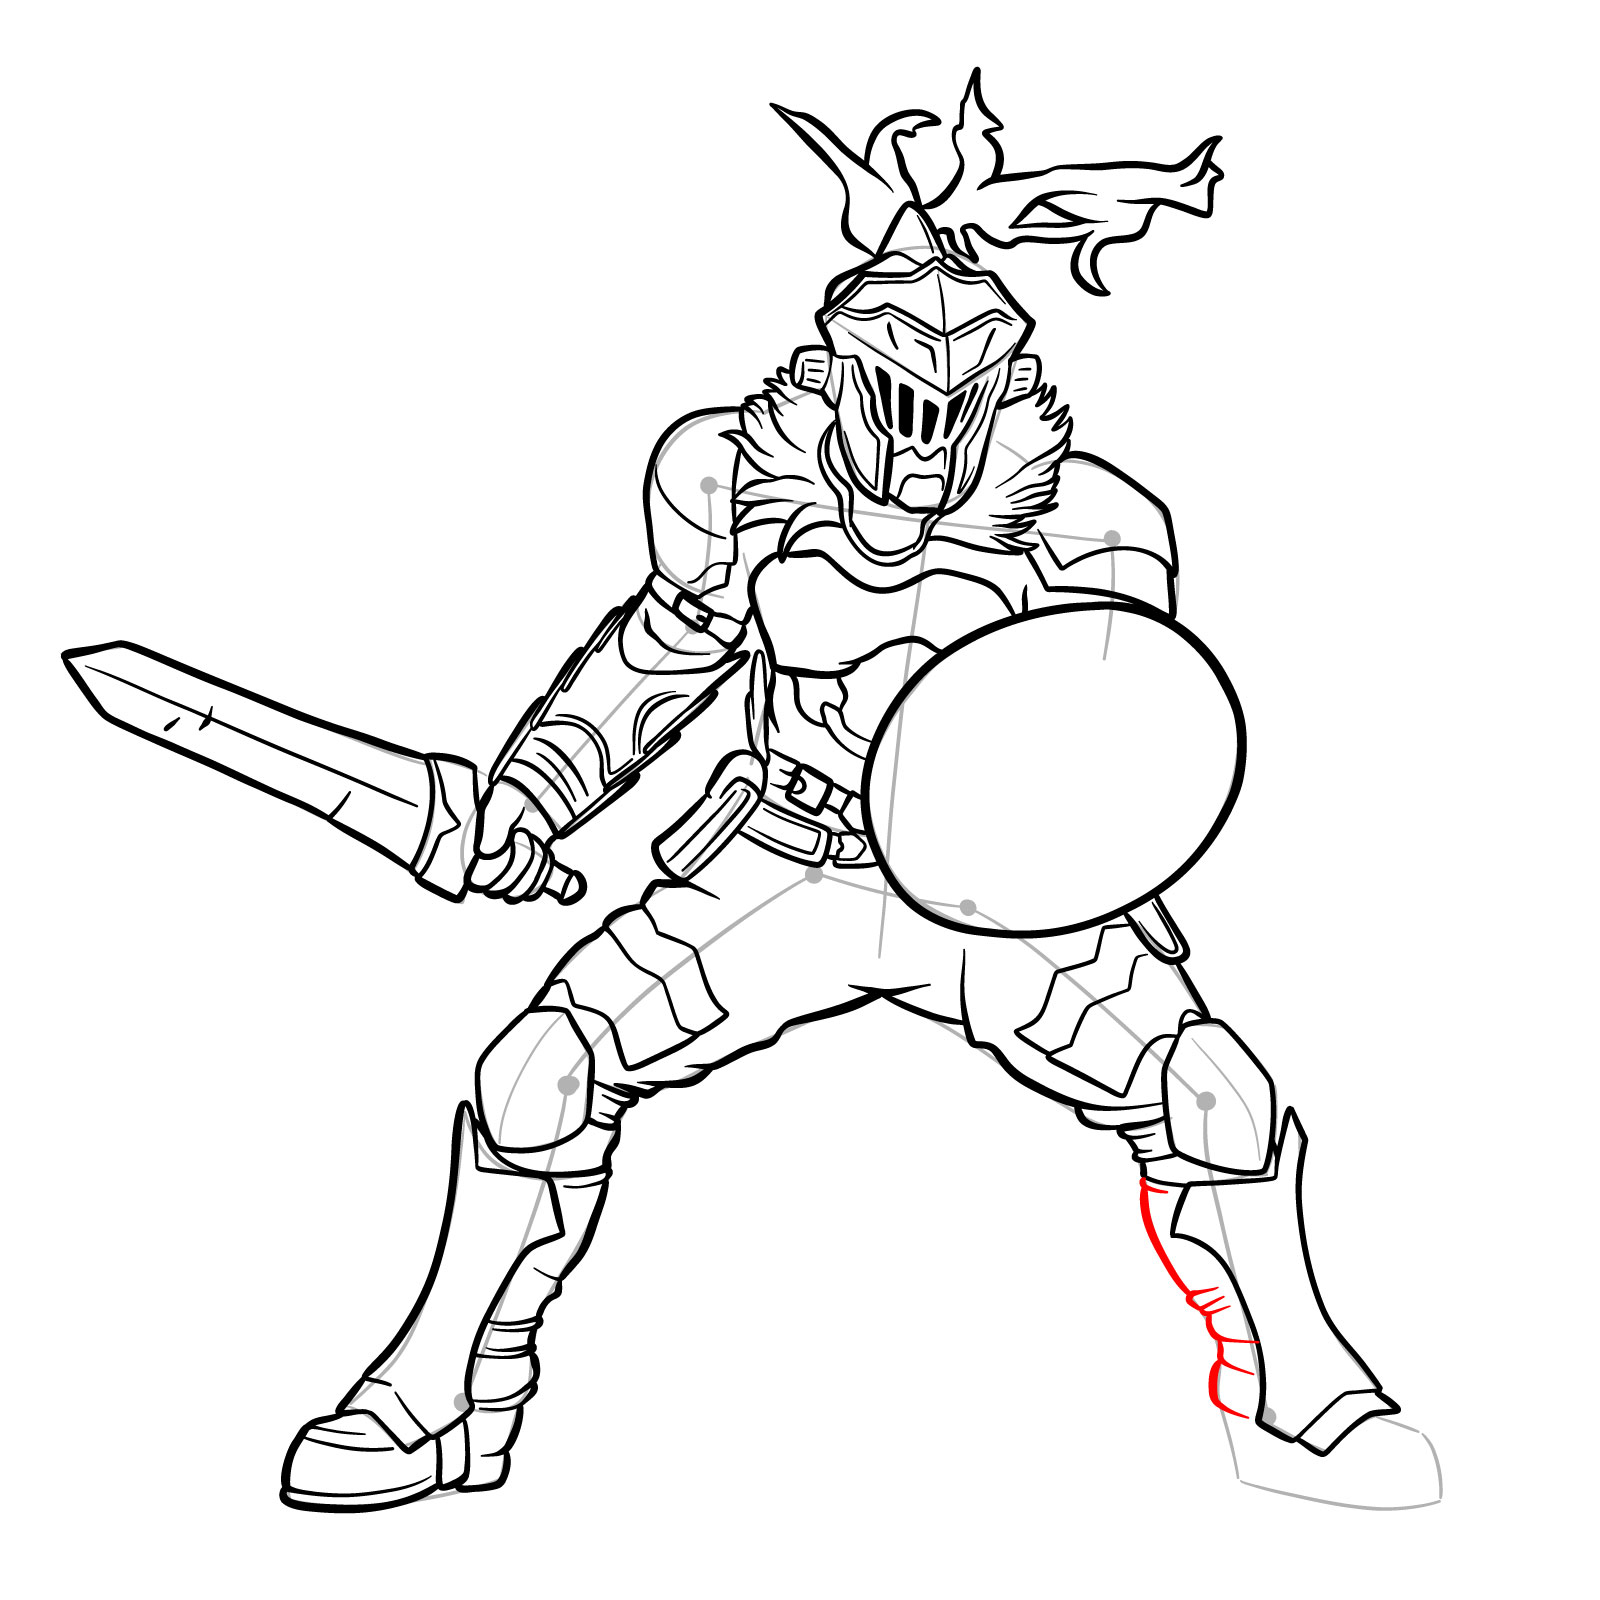 How to Draw Goblin Slayer in battle stance - step 36